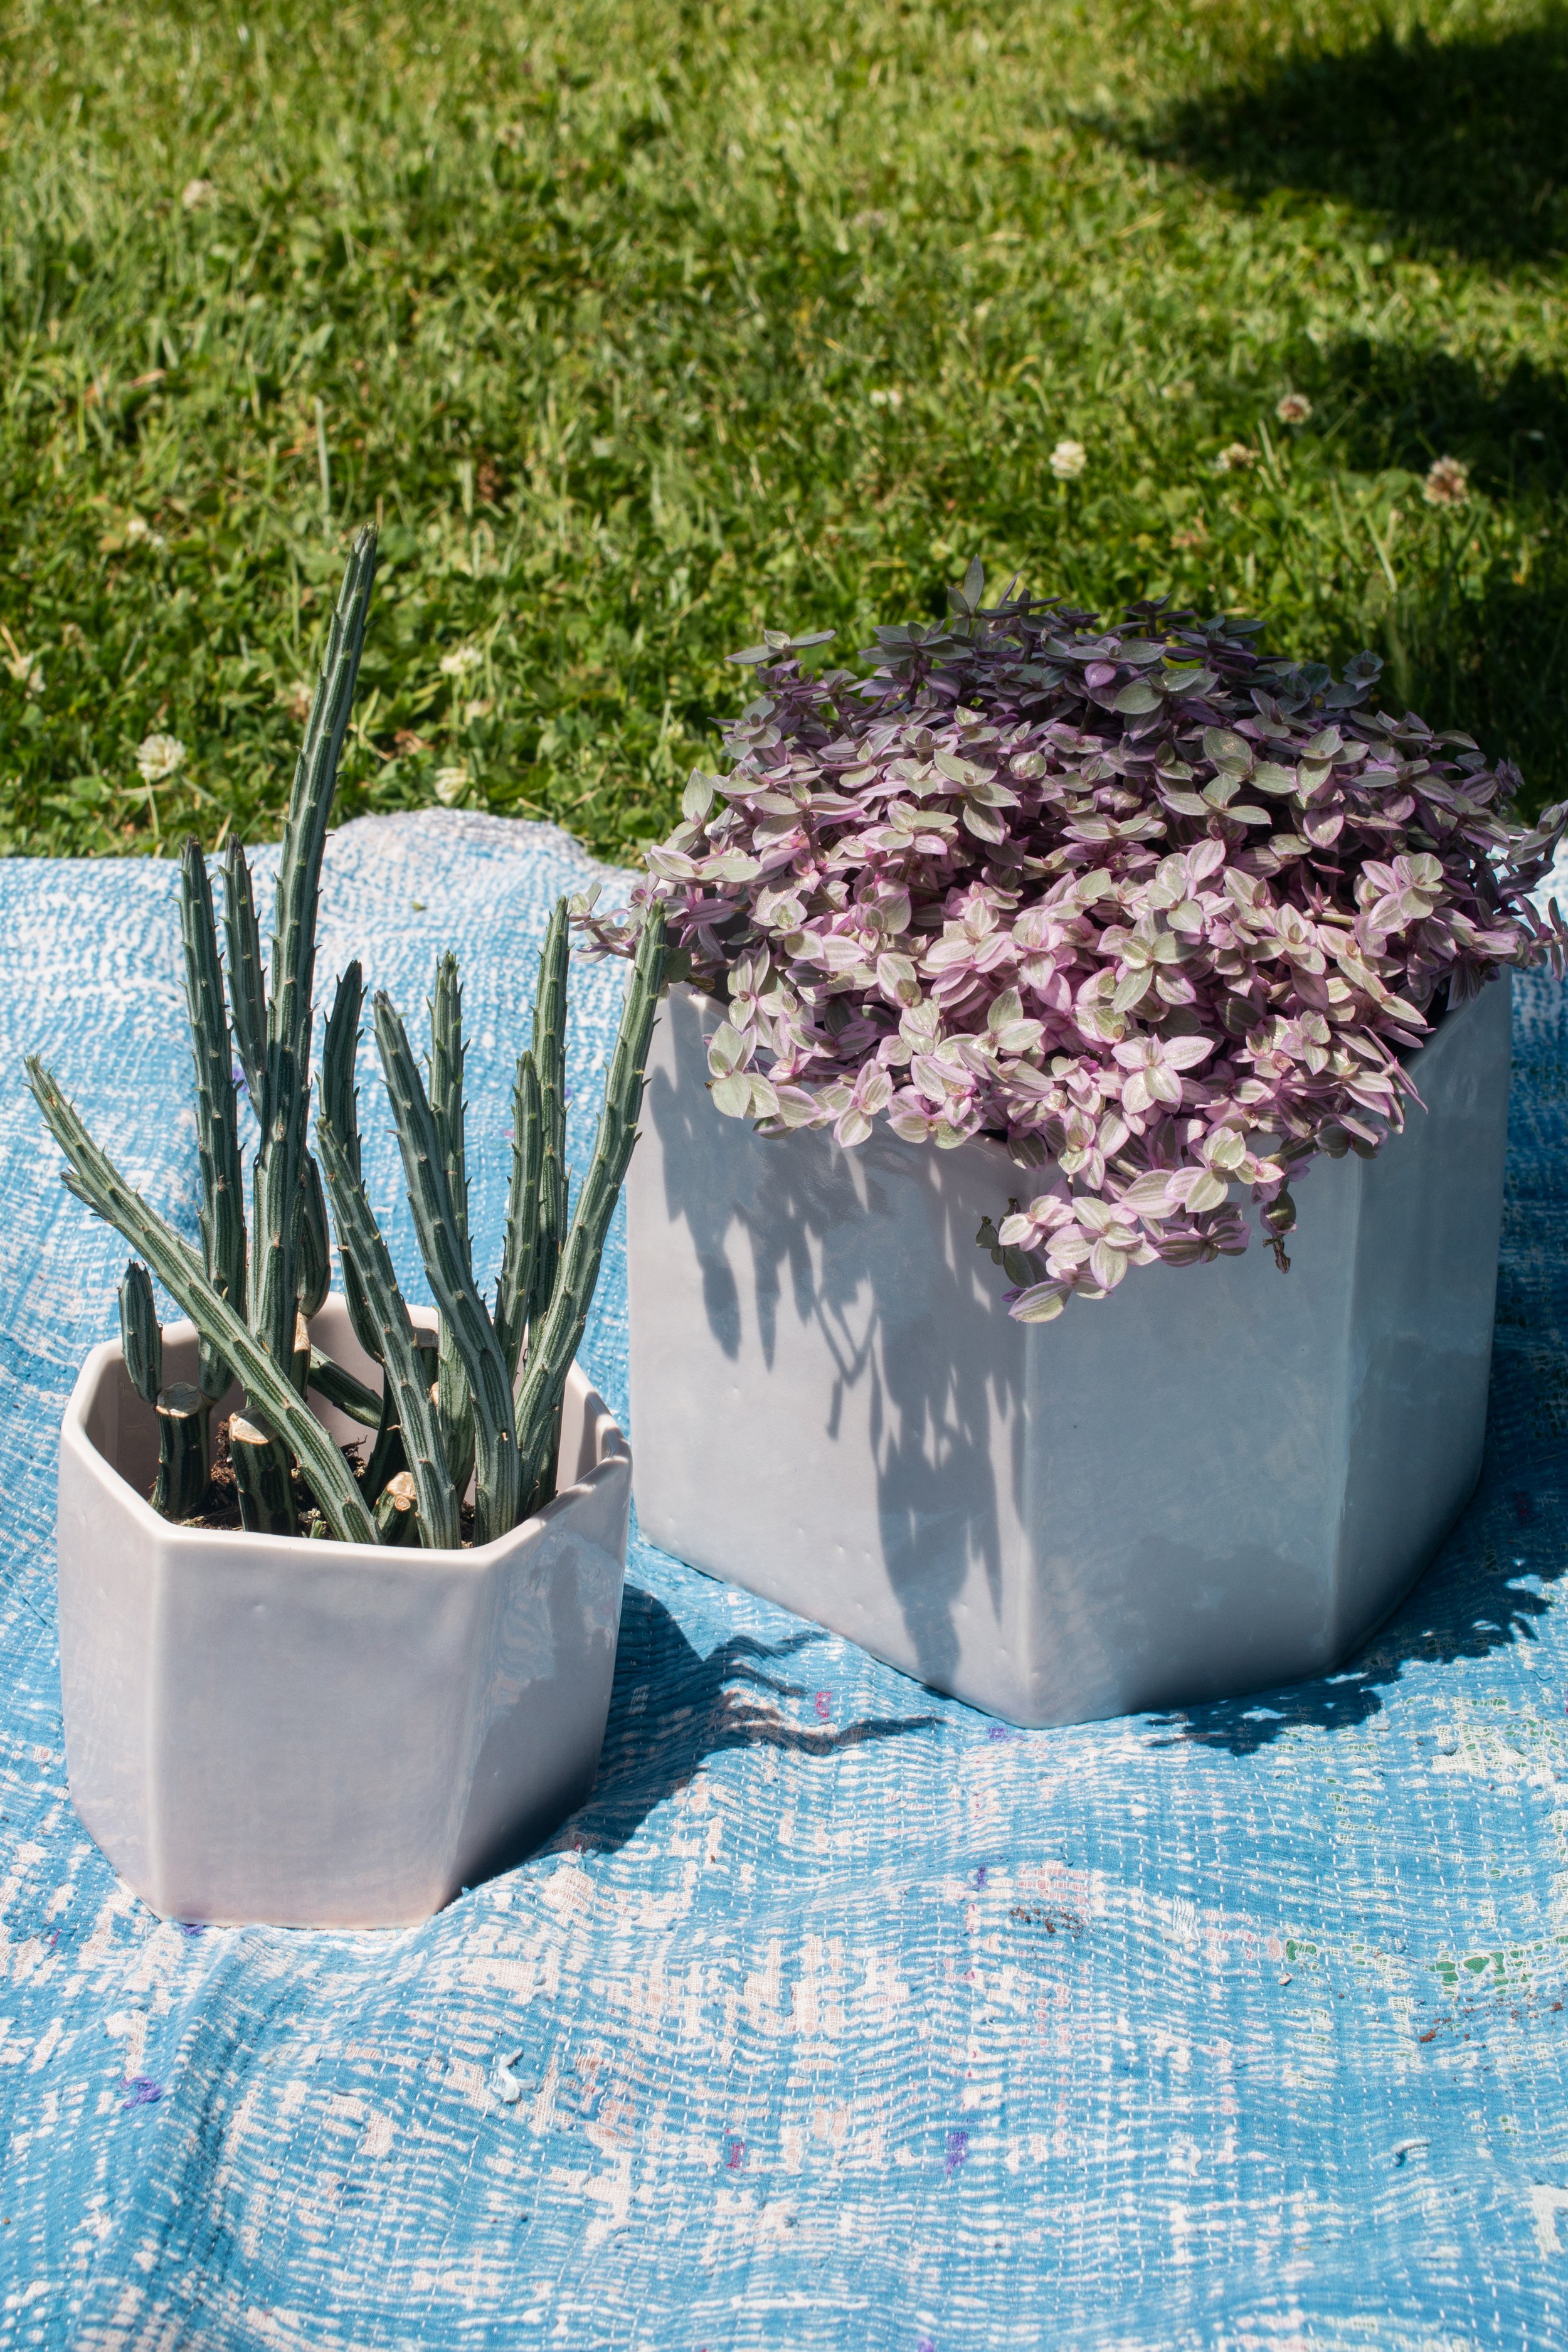  Two grey, geometric flower pots hand crafted by Lauren HB Studio available for purchase online 